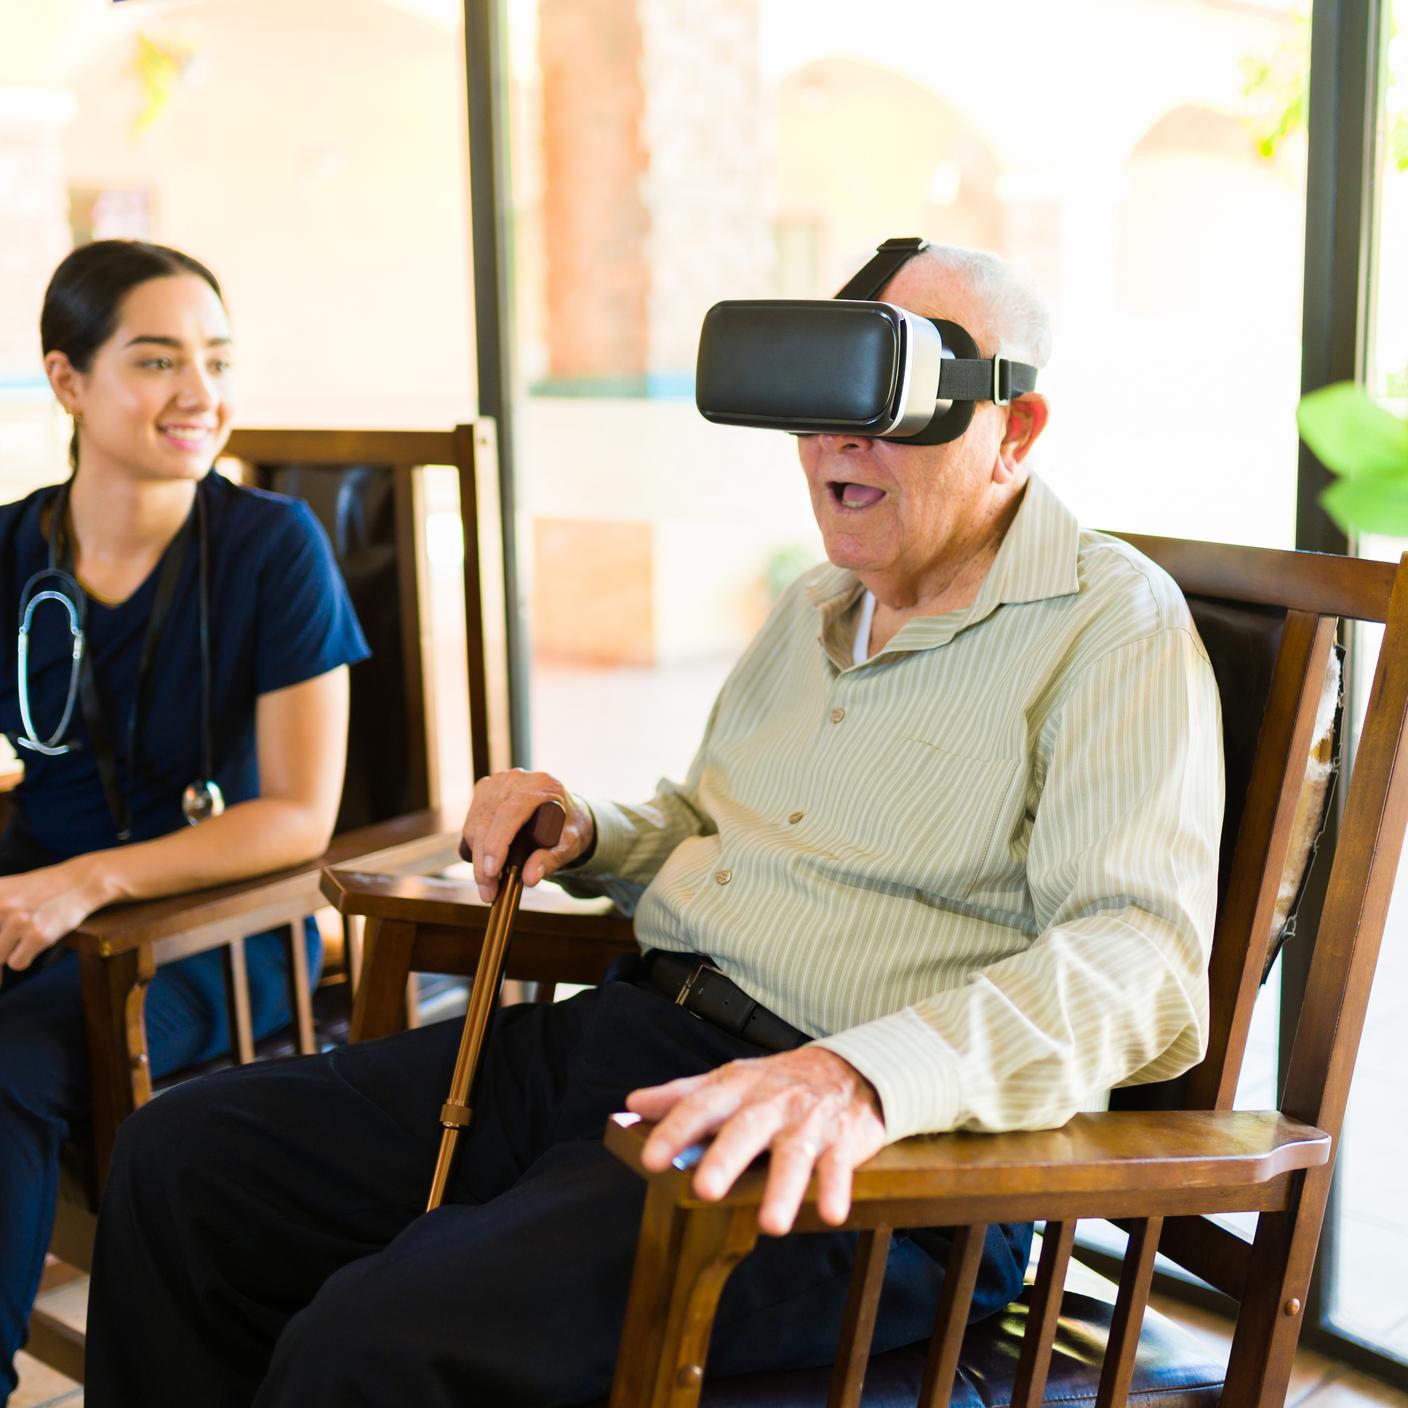 Elderly gentleman having fun at the nursery home while playing with virtual reality glasses